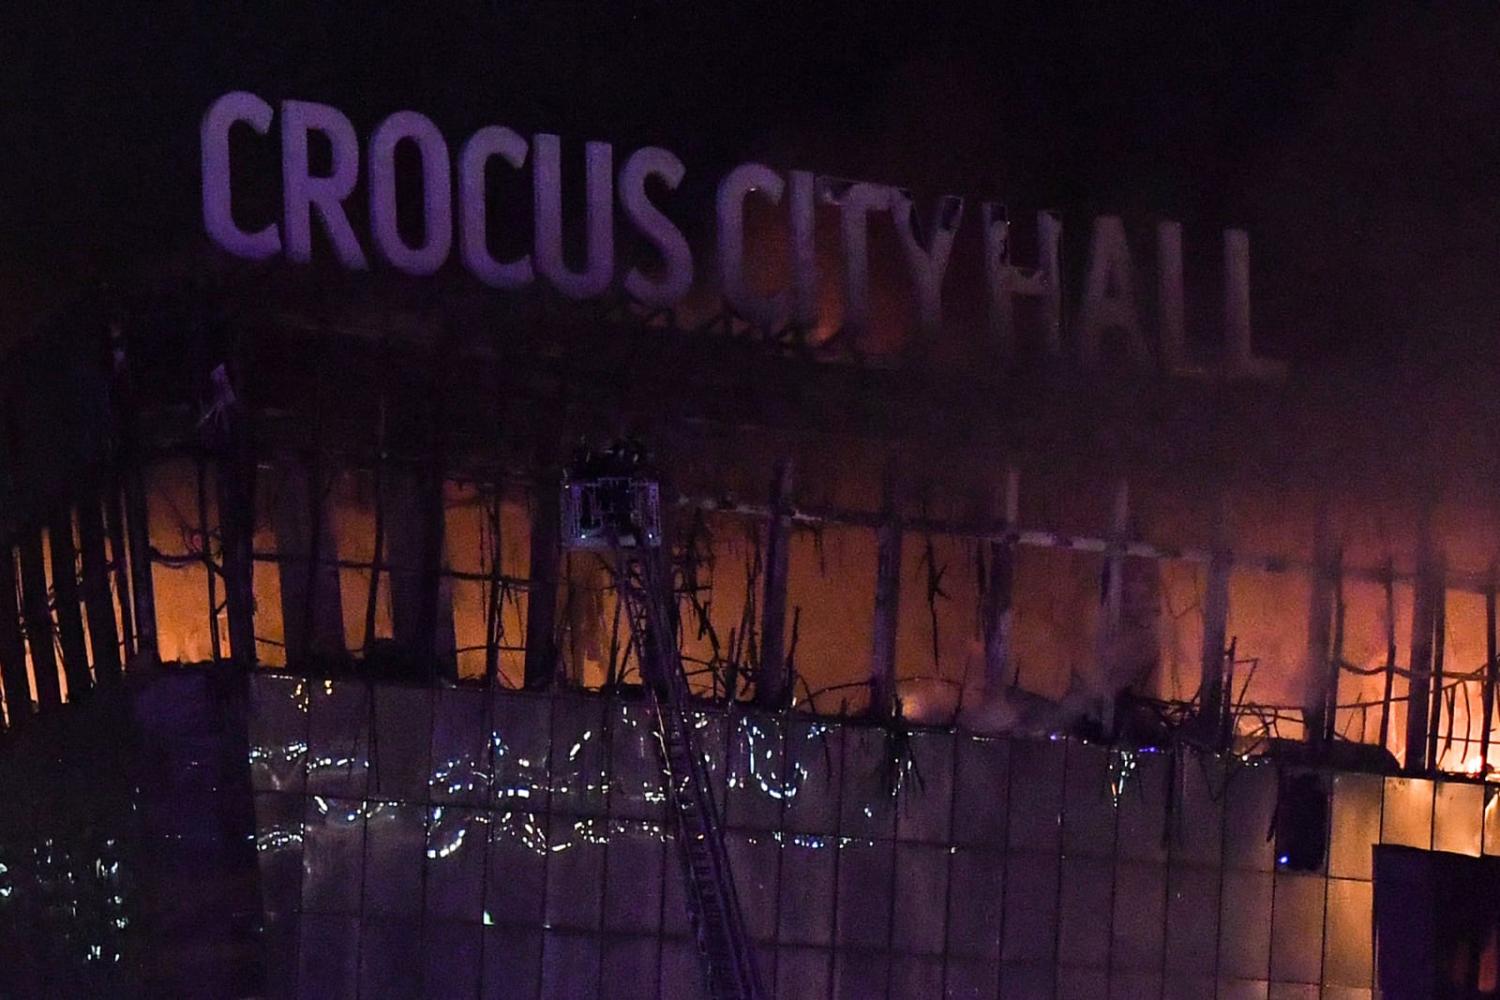 Fire engulfs the Crocus City Hall concert hall in the Moscow suburb Krasnogorsk following the terrorist rampage (Olga Maltseva/AFP via Getty Images)